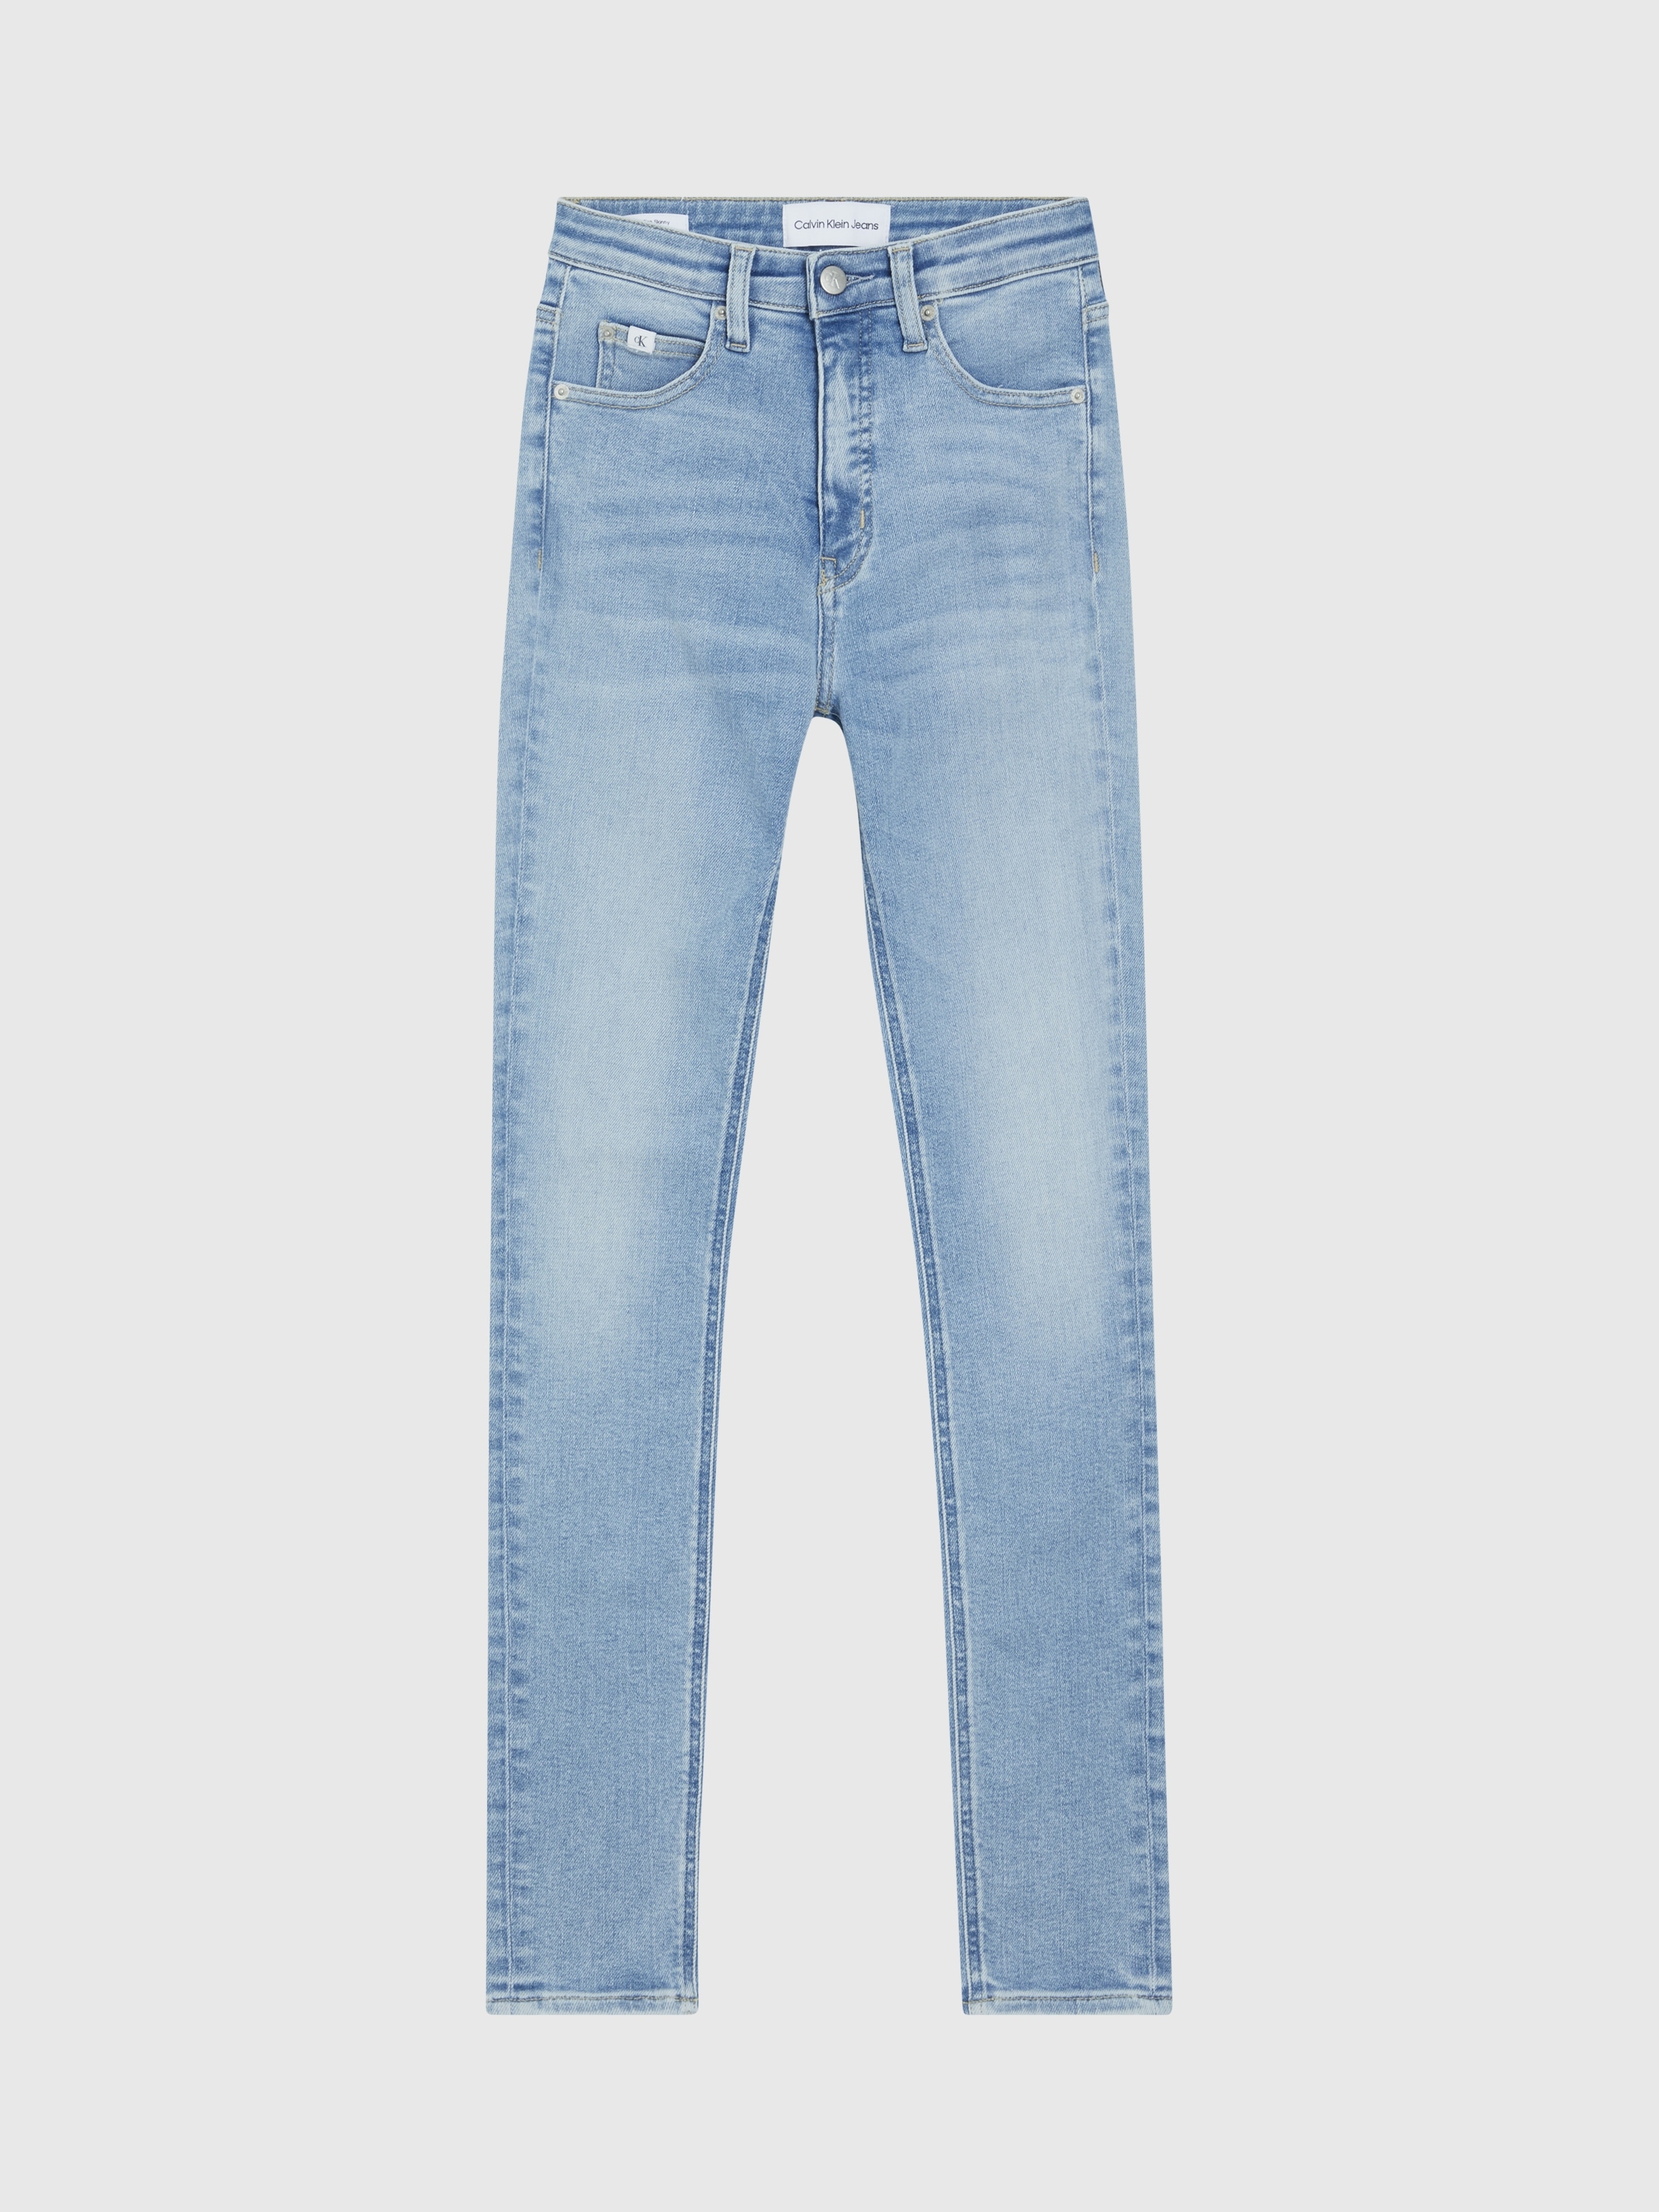 Calvin Klein Jeans Skinny-fit-Jeans »HIGH RISE SKINNY«, mit Markenlabel